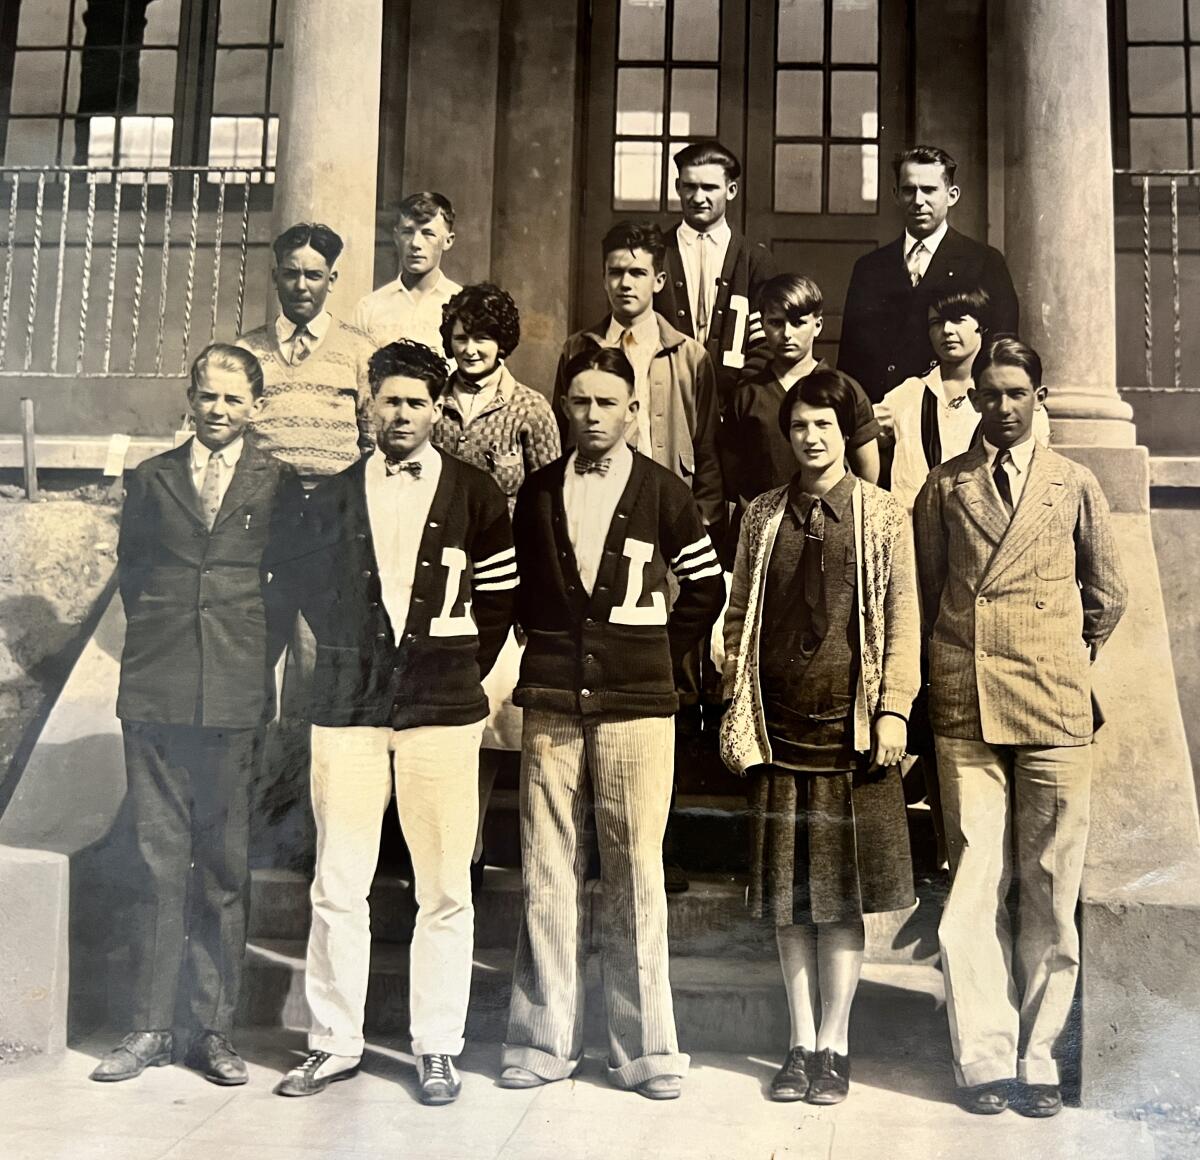 La Jolla High School's student body officers are pictured in 1926 with Principal Buel Enyeart in the back to the right.